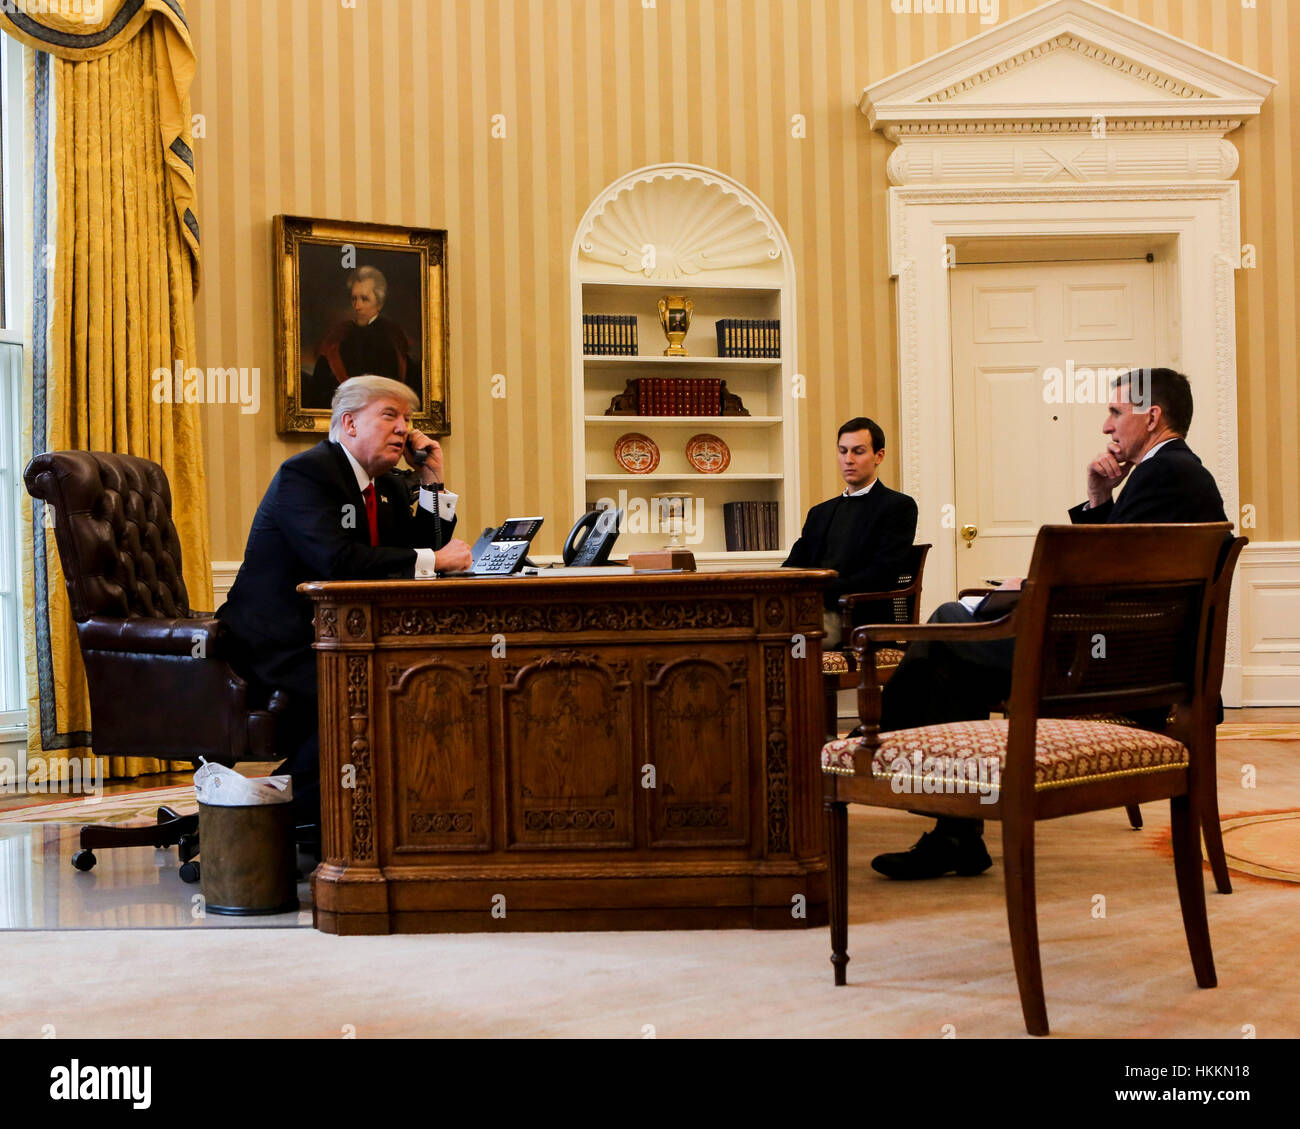 Washington, USA. 29th January, 2017. US President Donald Trump speaks on the phone with the King of Saudi Arabia, Salman bin Abd al-Aziz Al Saud in the Oval Office of the White House, surrounded by Senior Adviser to the President Jared Kushner (C), and Security Advisor Michael Flynn (R). Credit: Aude Guerrucci/Pool via CNP/MediaPunch/Alamy Live News Stock Photo